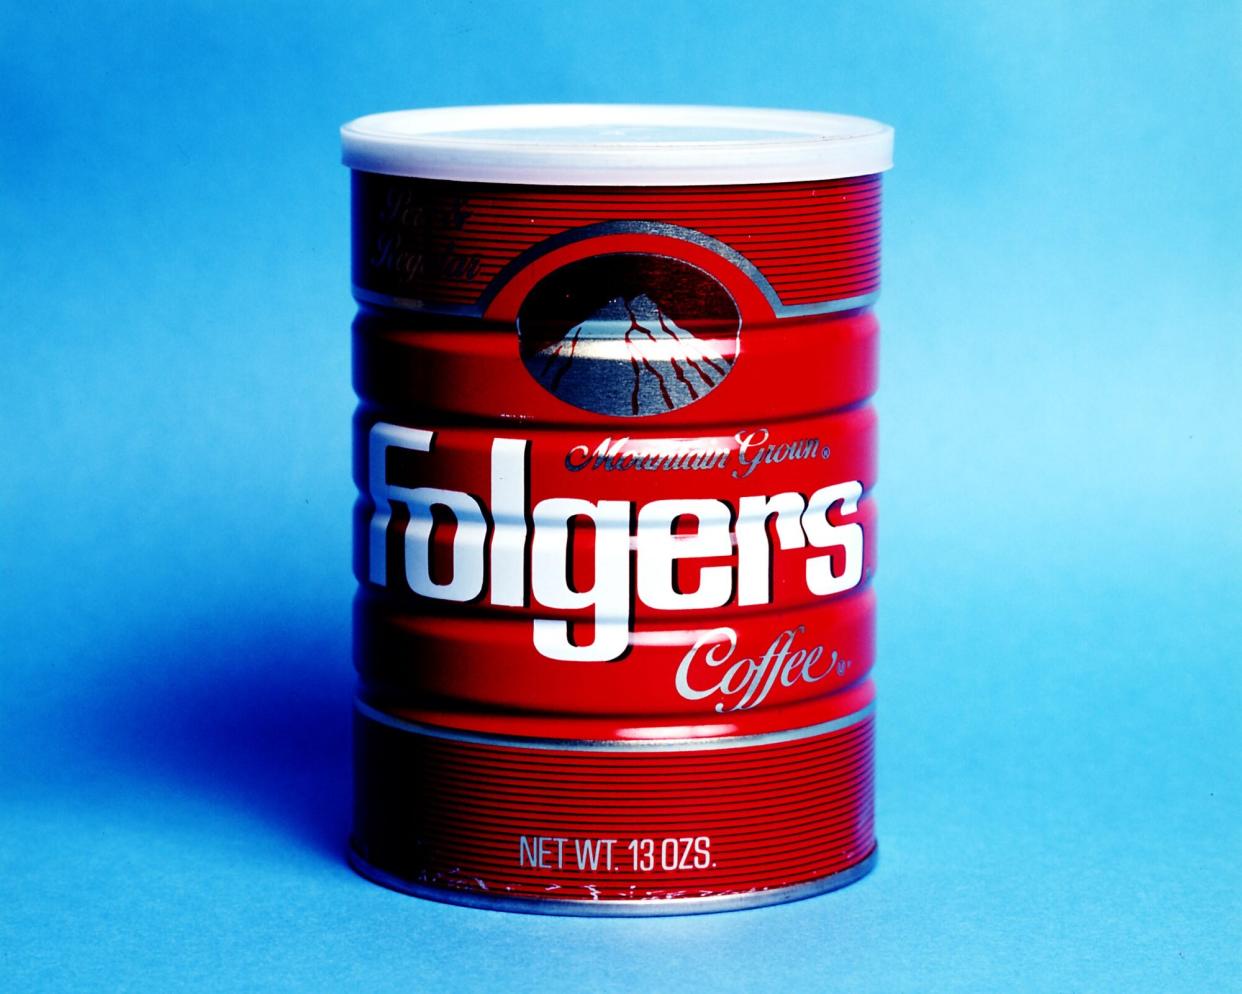 Folgers coffee can